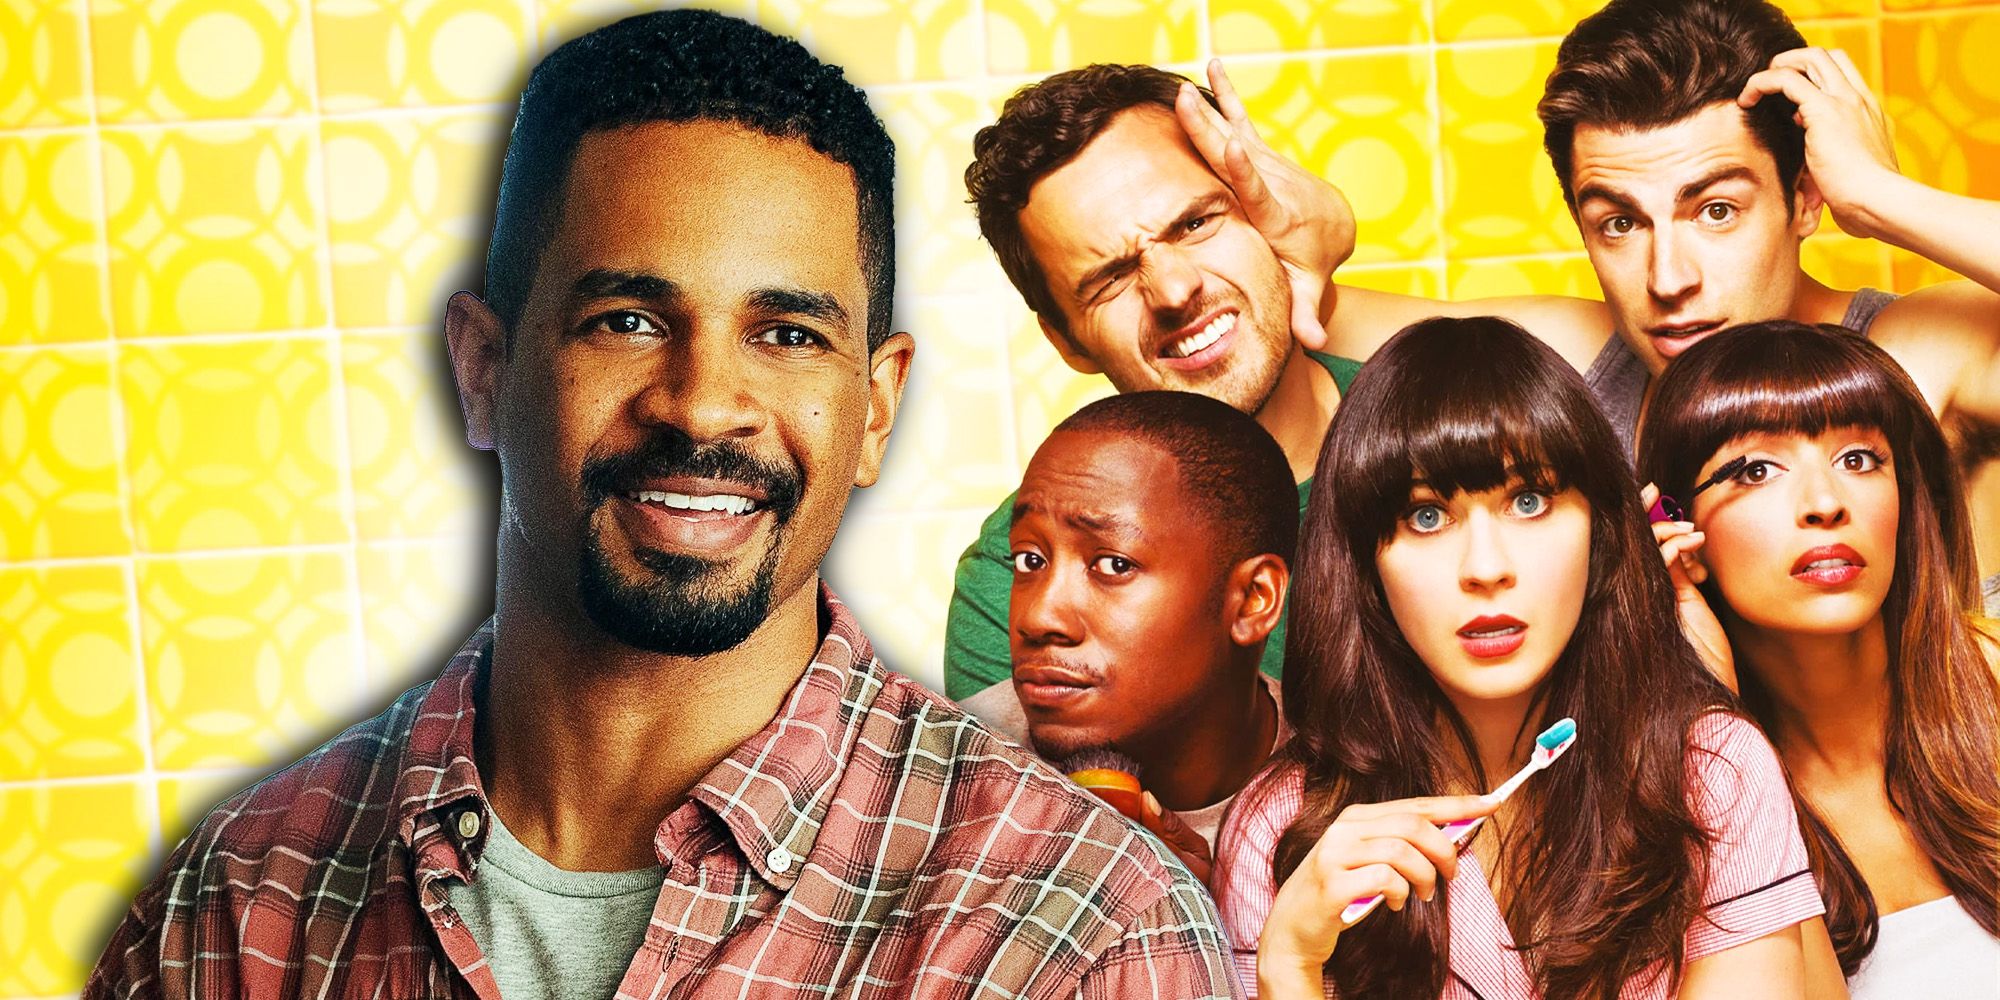 Damon Wayans Jr as Adam in Players and the cast of New Girl